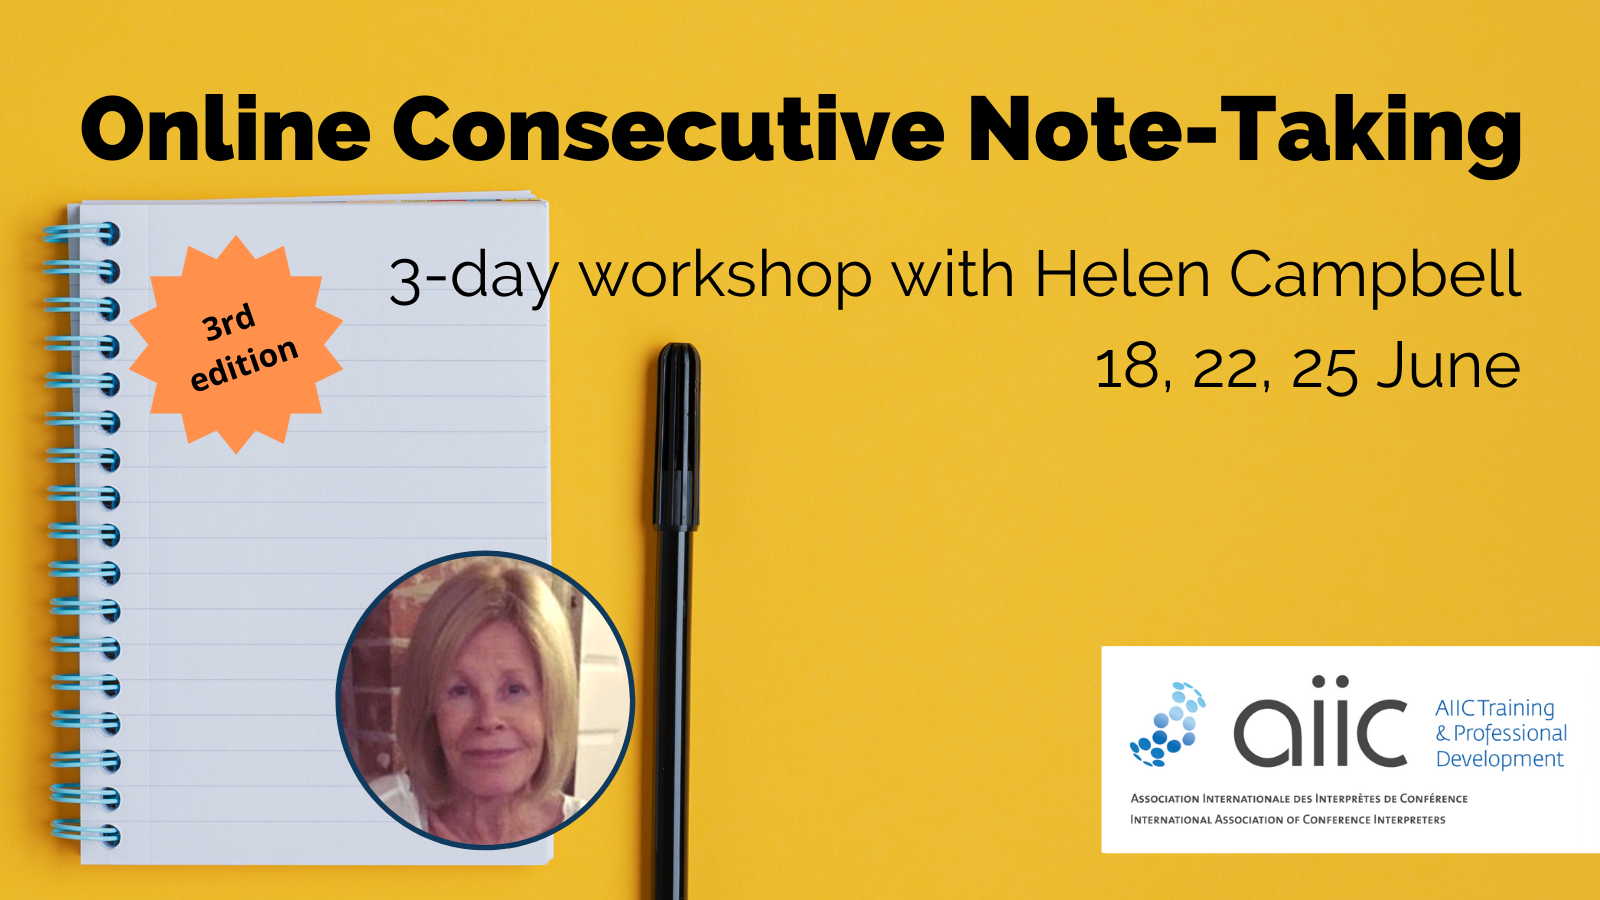 poster online note-taking with Helen Campbell